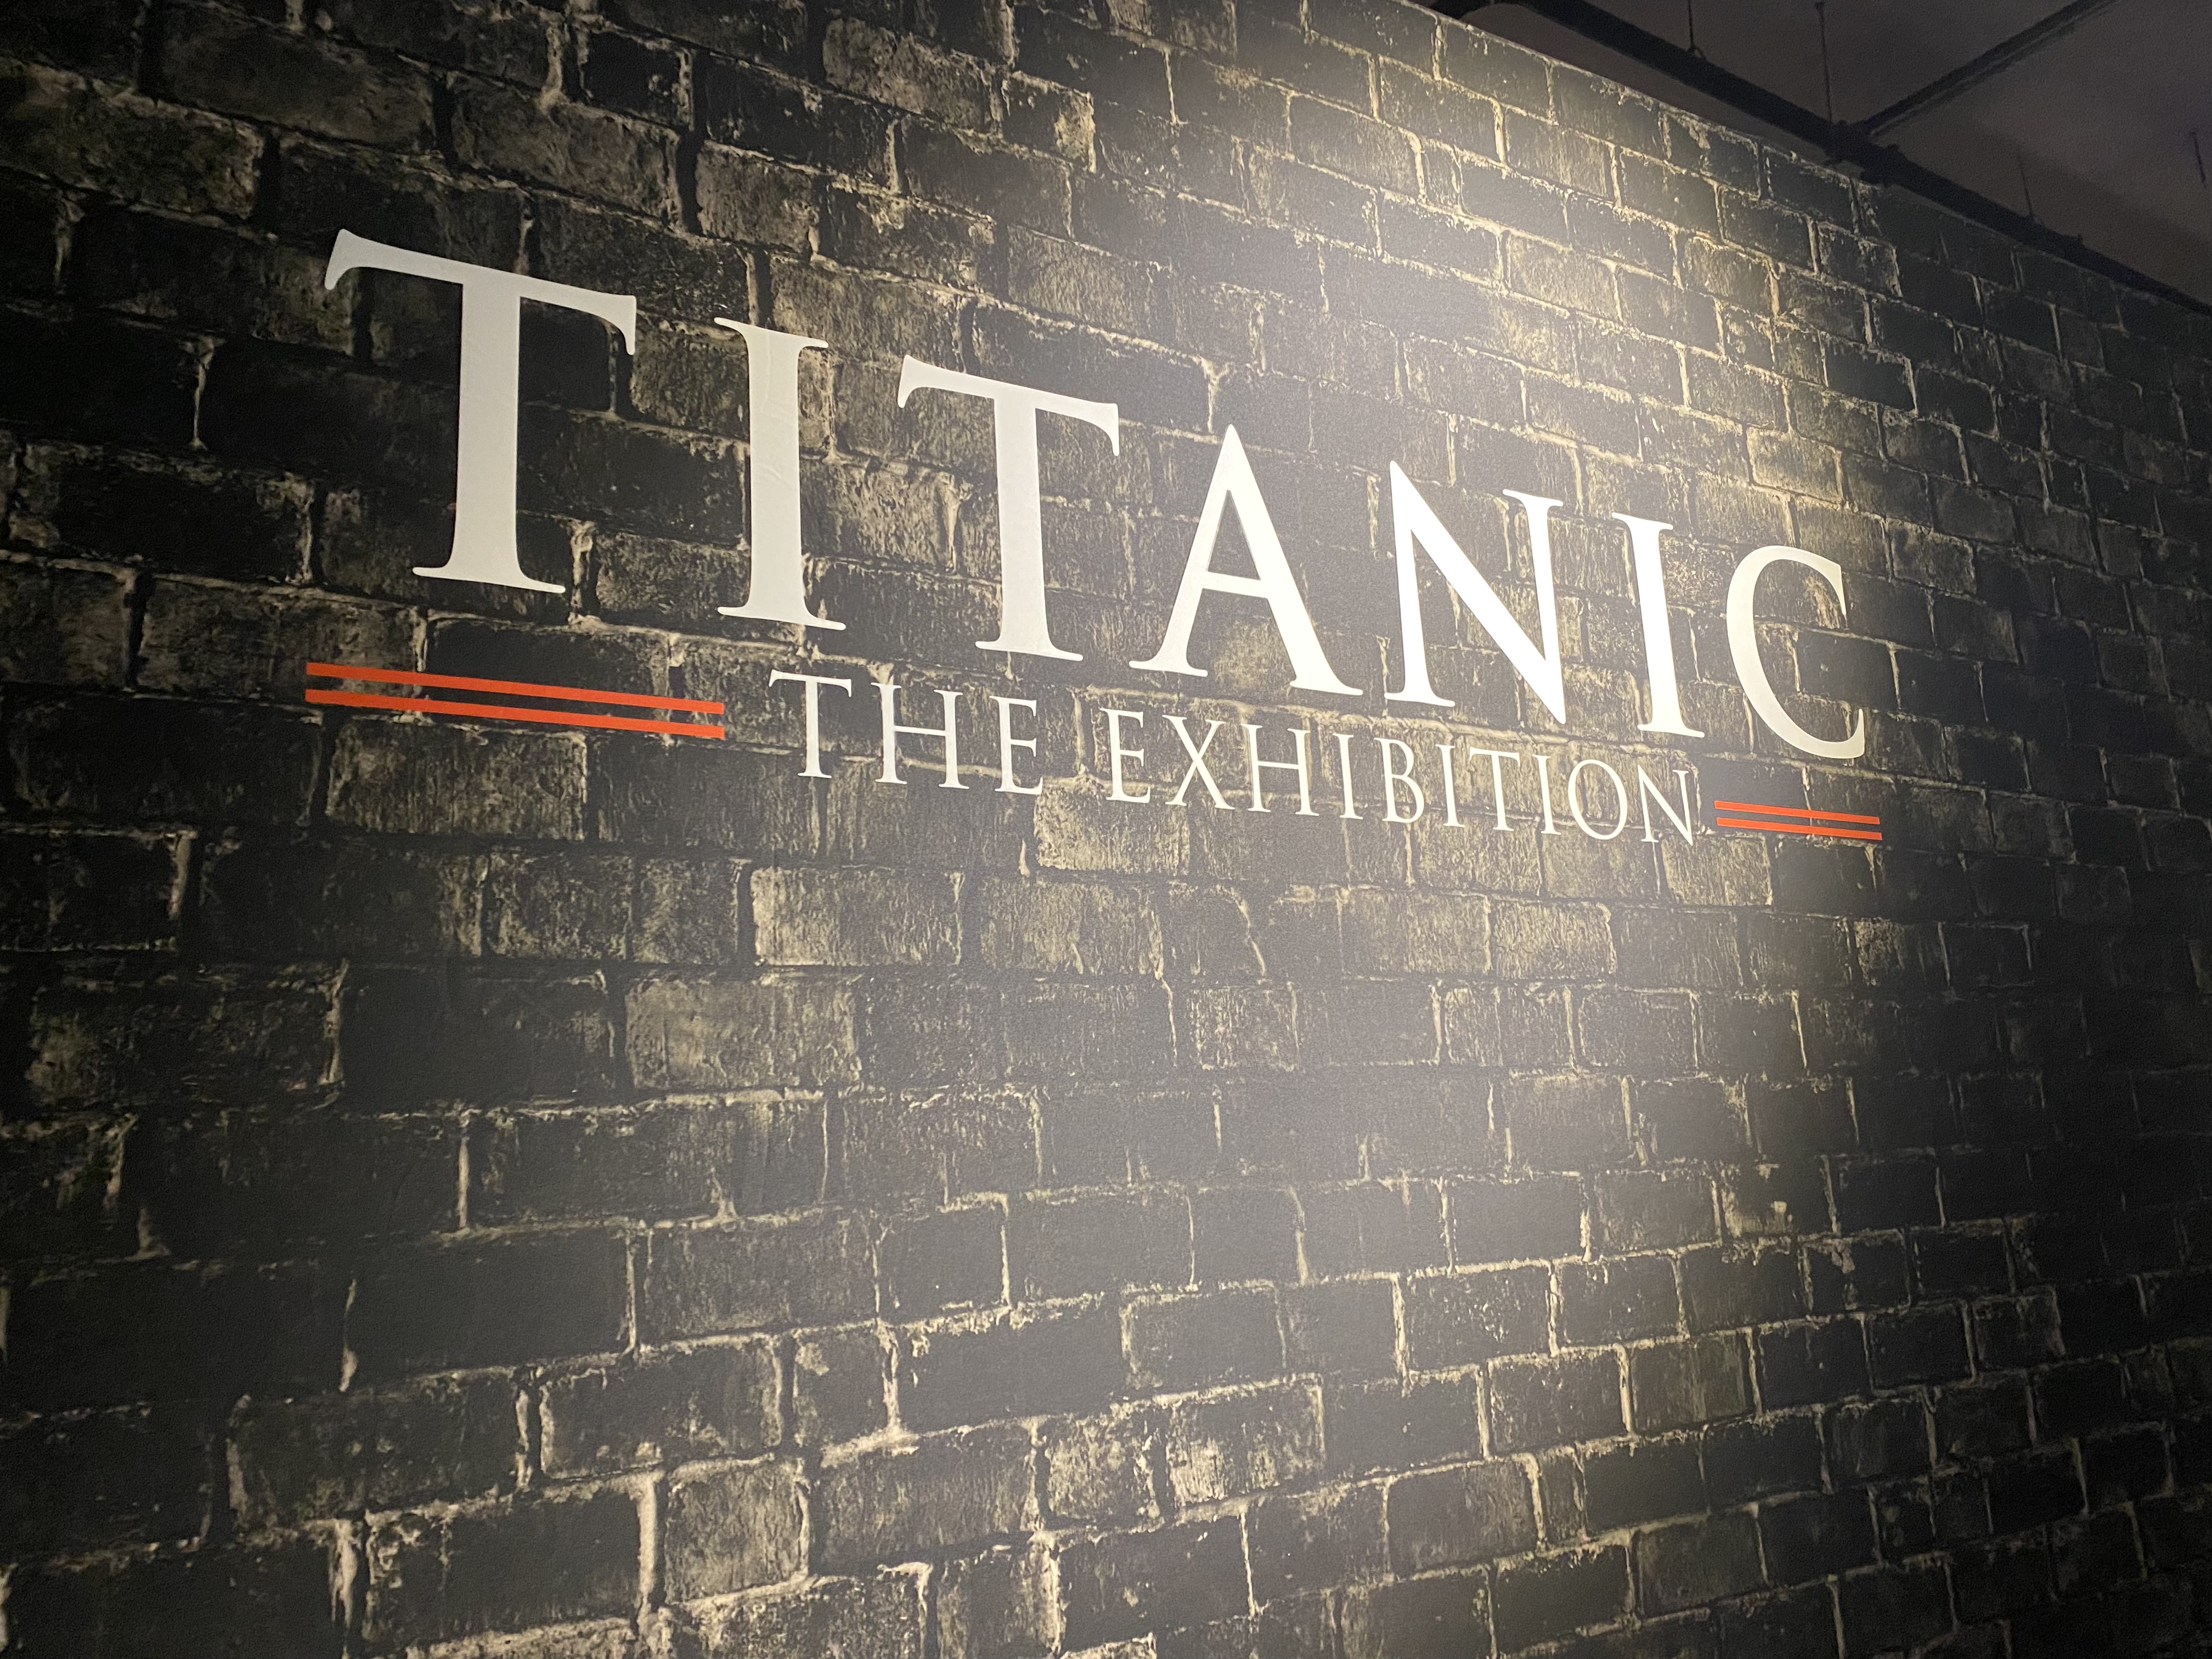 A Titanic exhibit is opening in NYC this fall